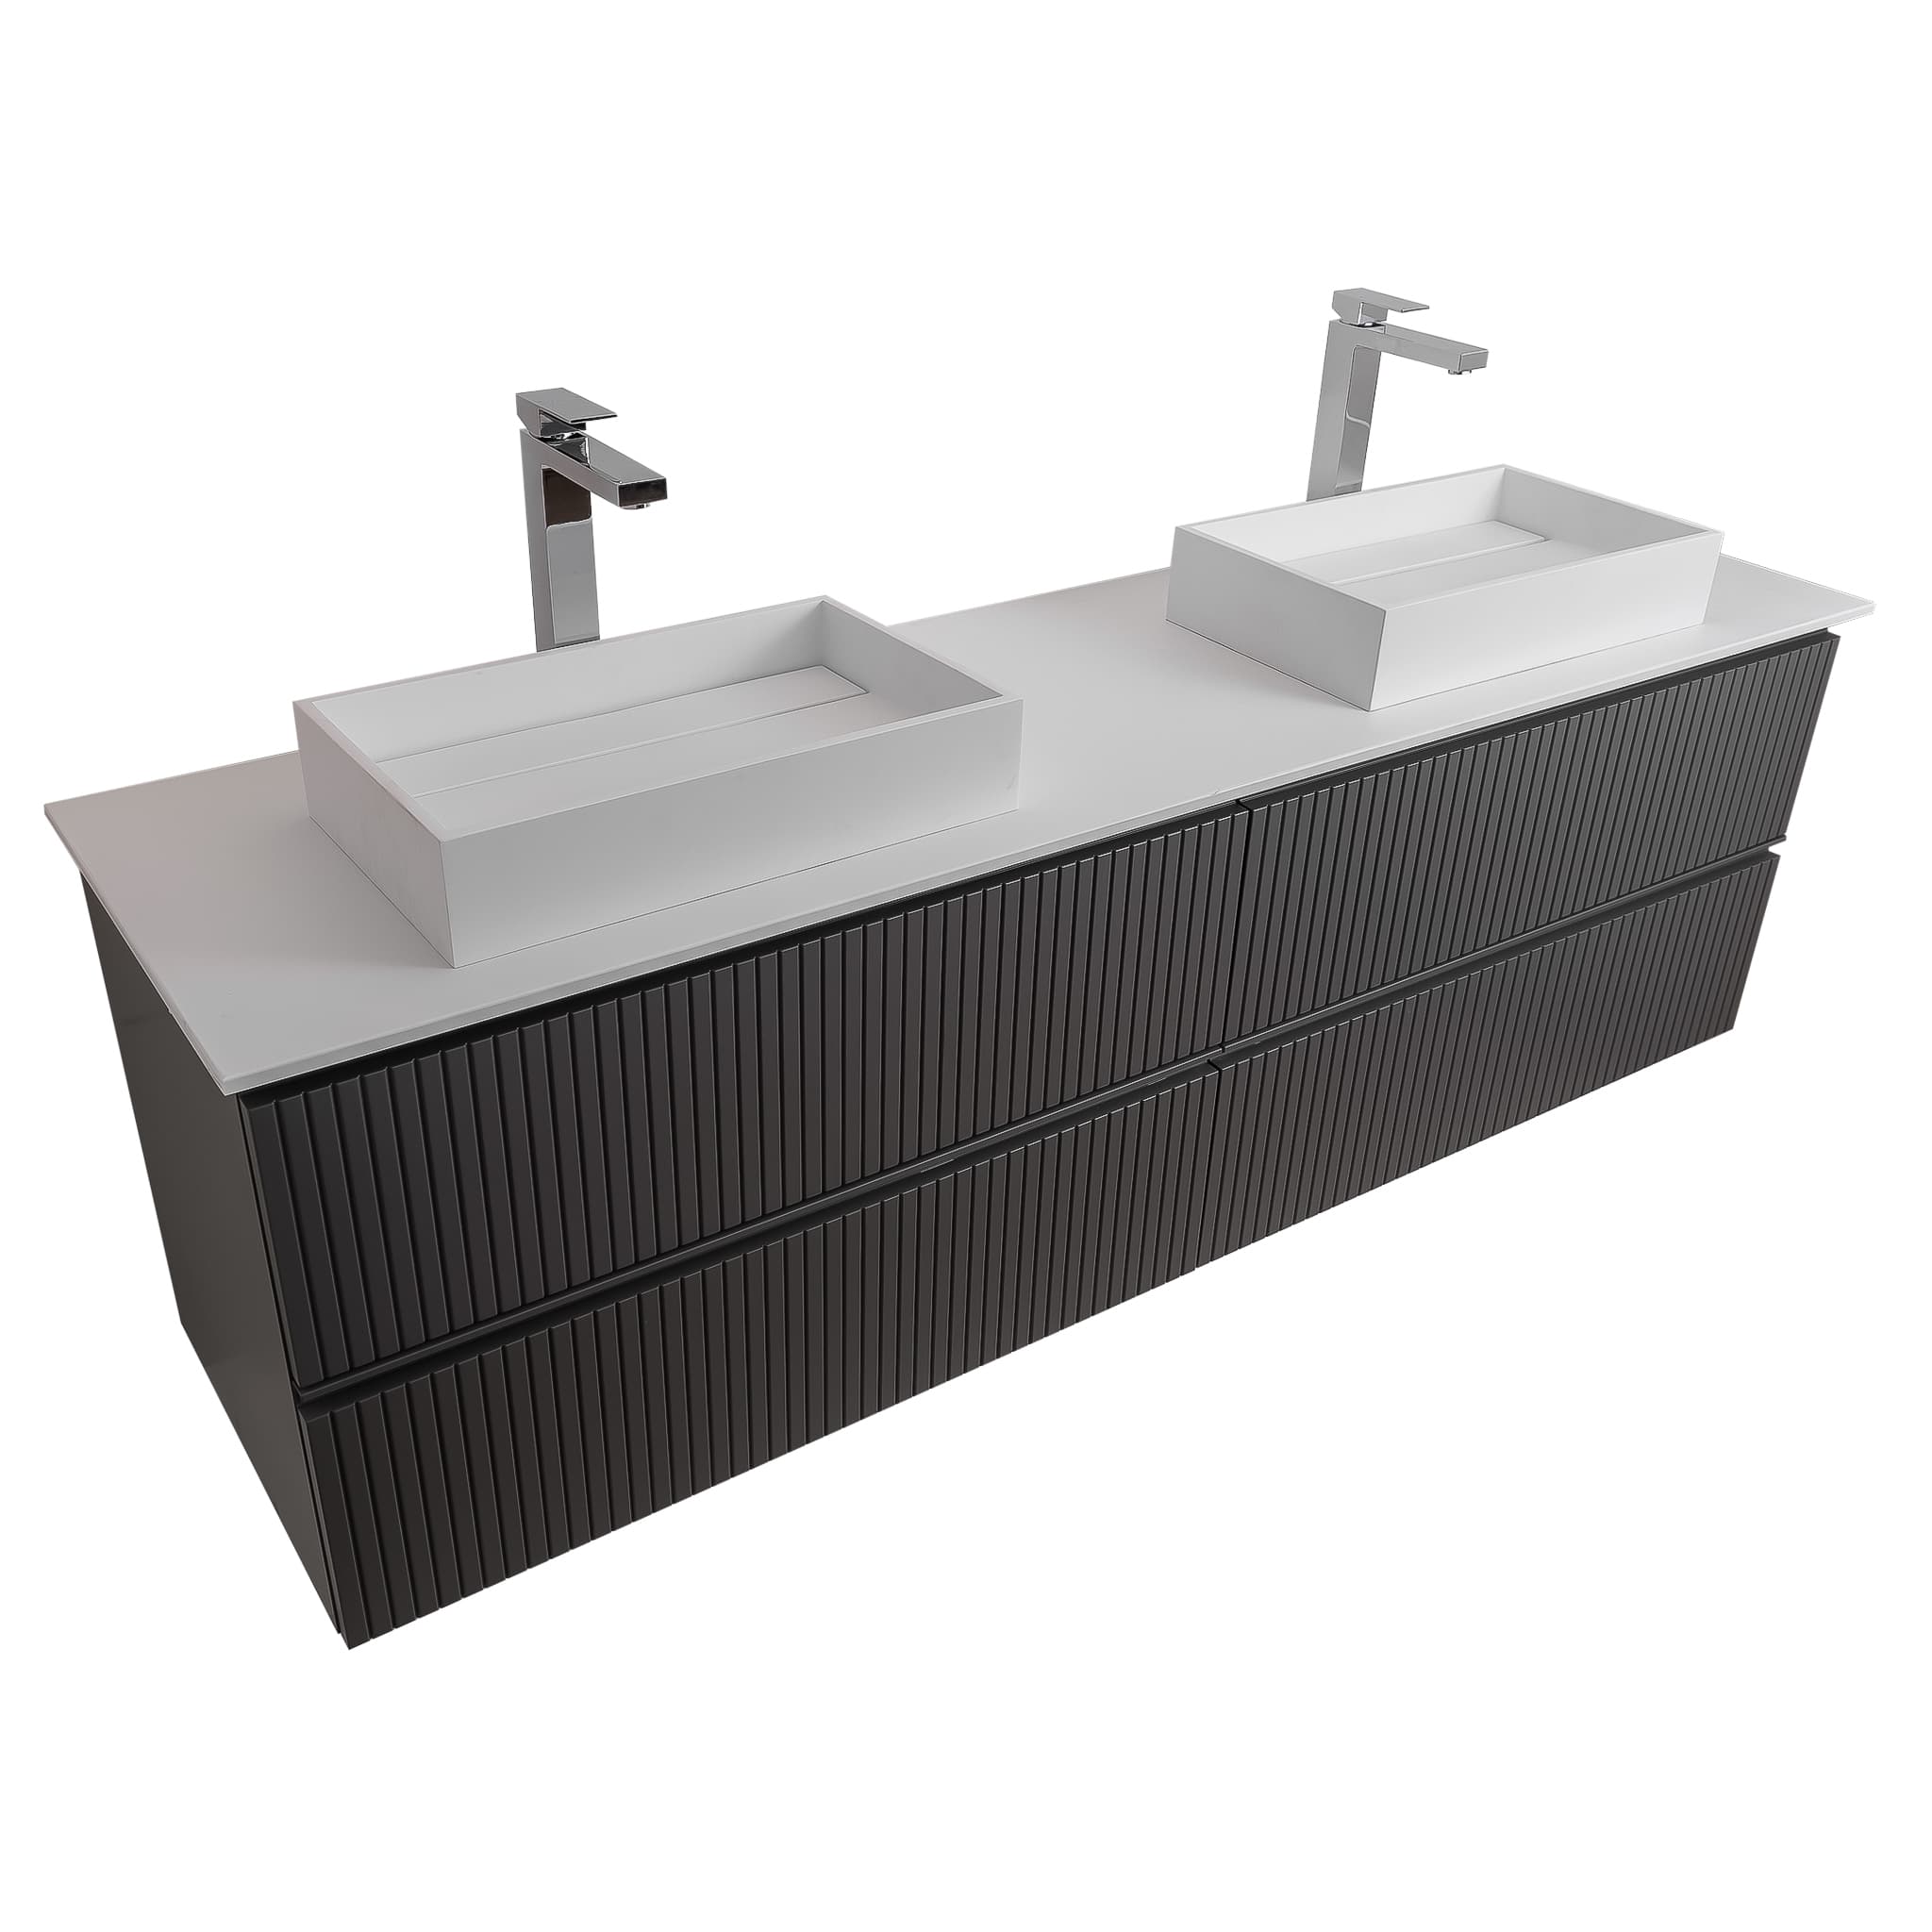 Ares 63 Matte Grey Cabinet, Solid Surface Flat White Counter And Two Infinity Square Solid Surface White Basin 1329, Wall Mounted Modern Vanity Set